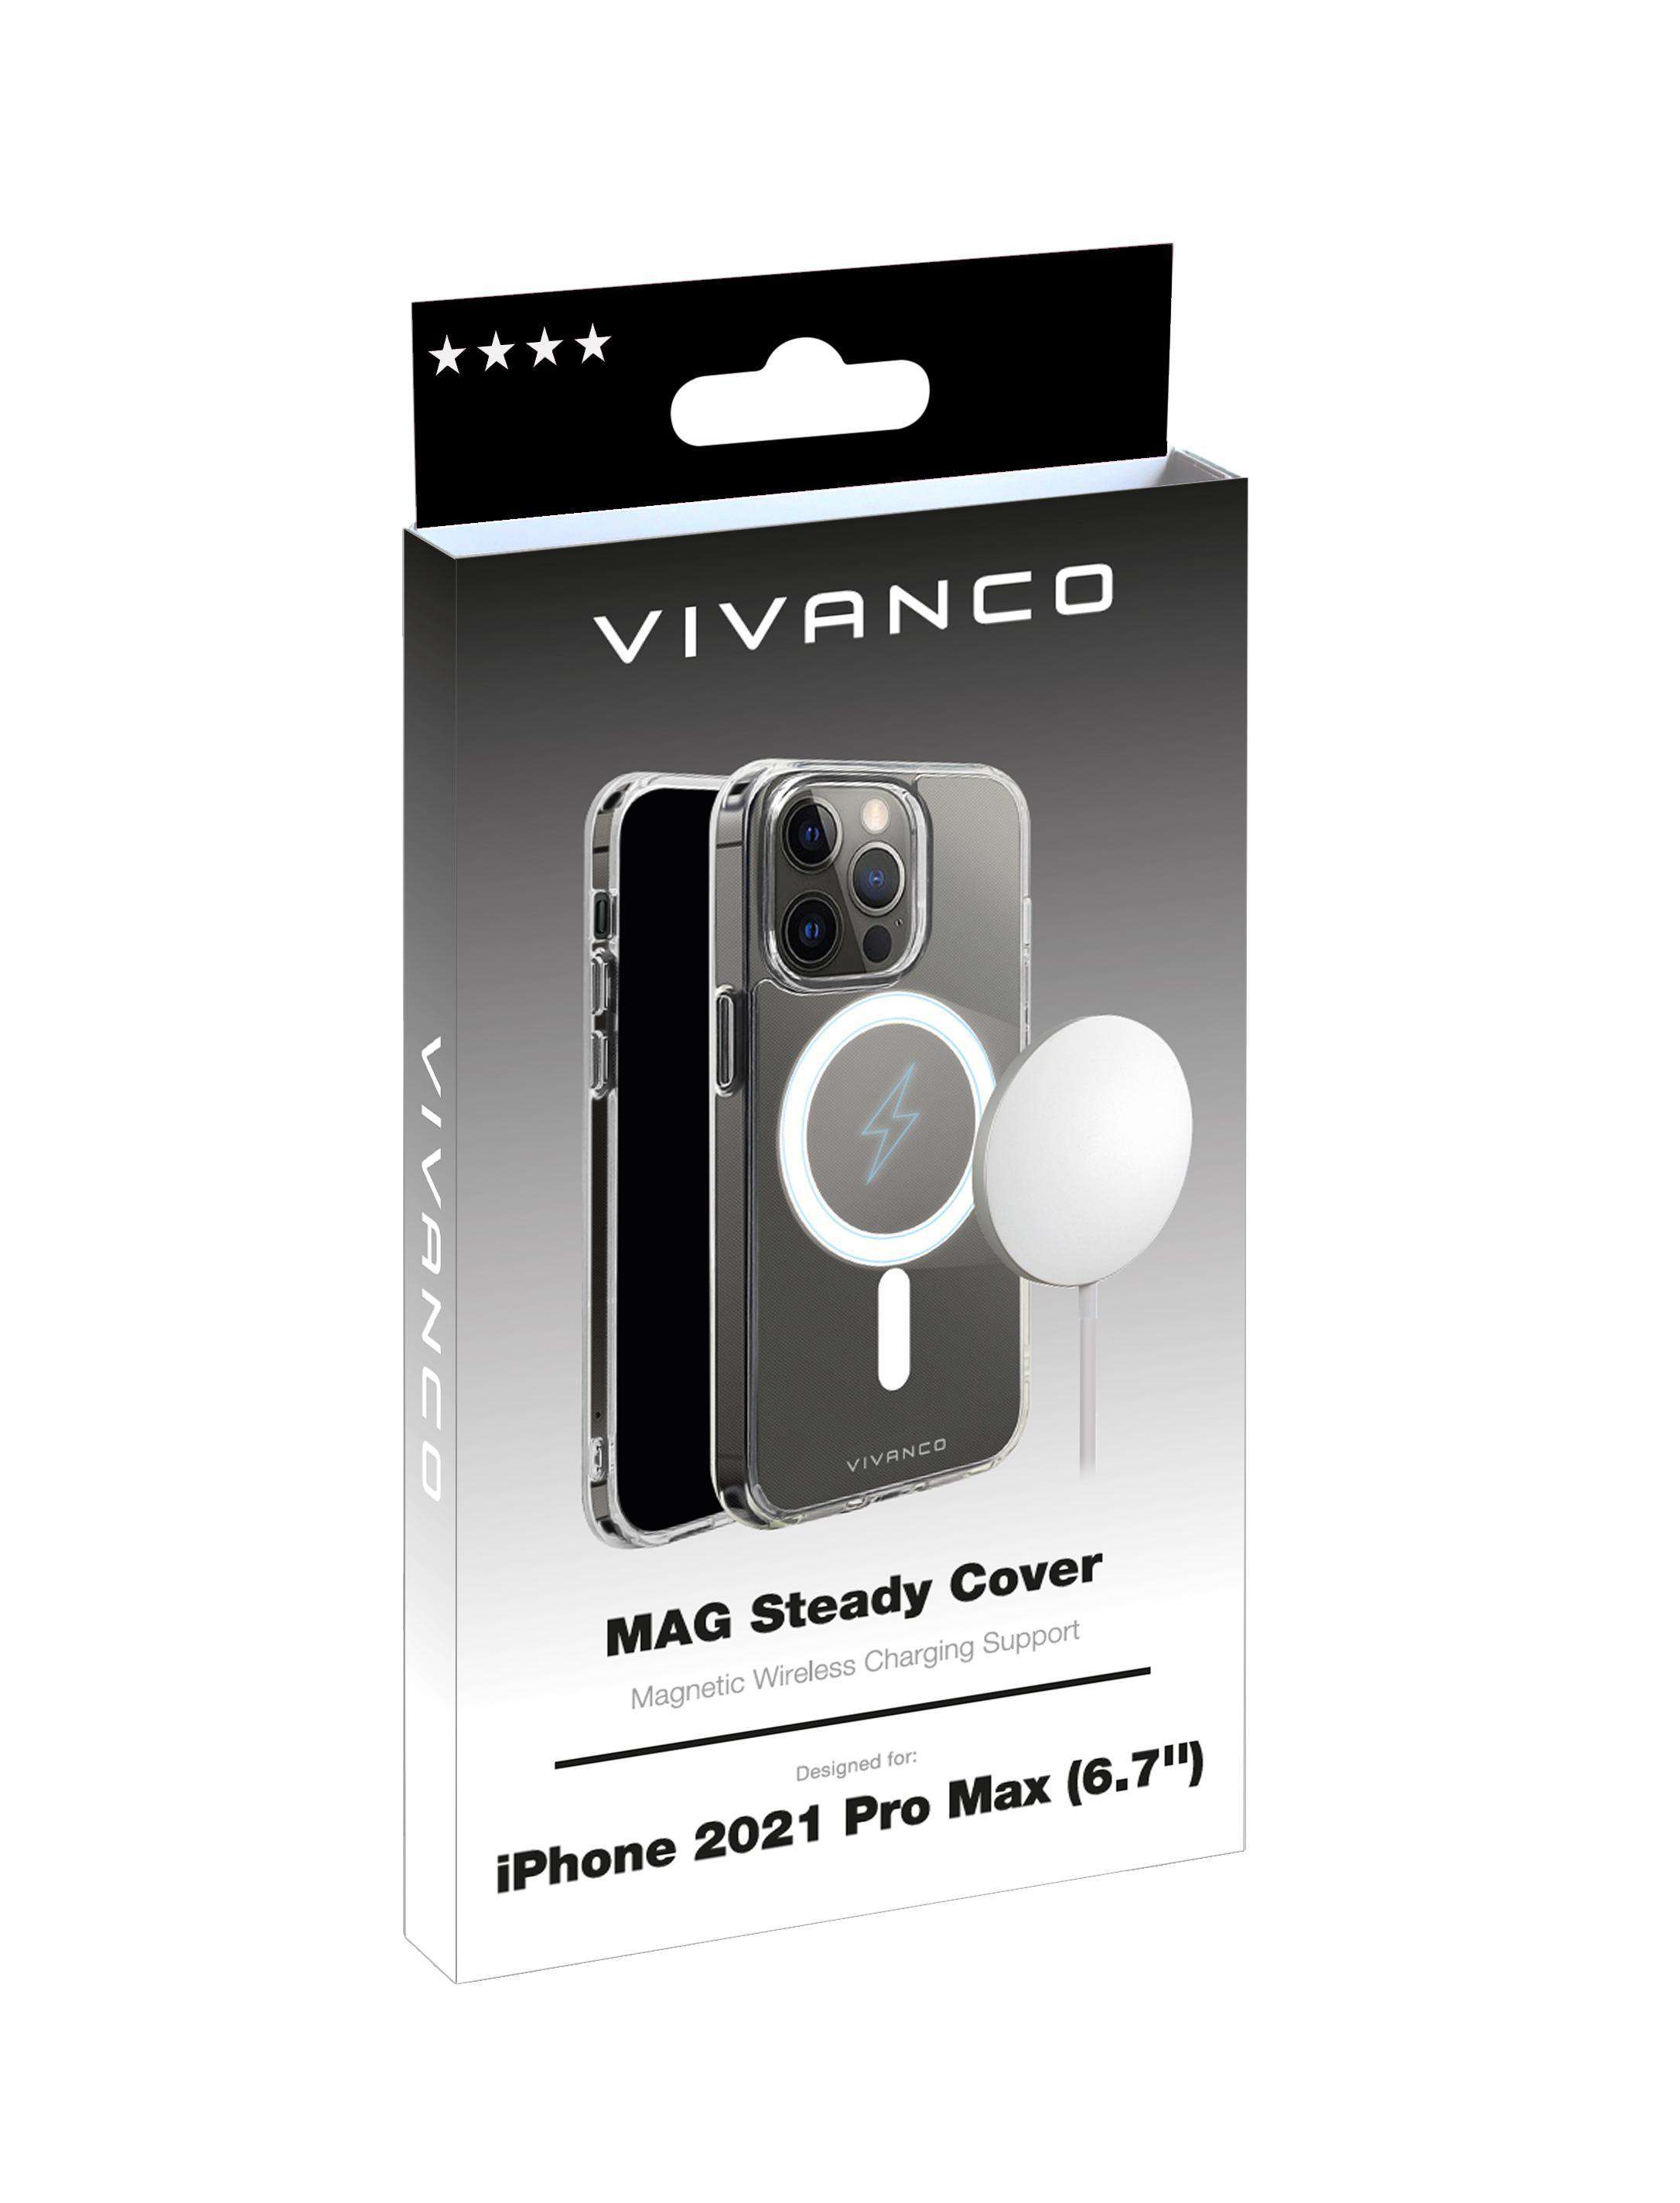 Pro Apple, Mag Steady, 13 Backcover, iPhone Transparent VIVANCO Max,